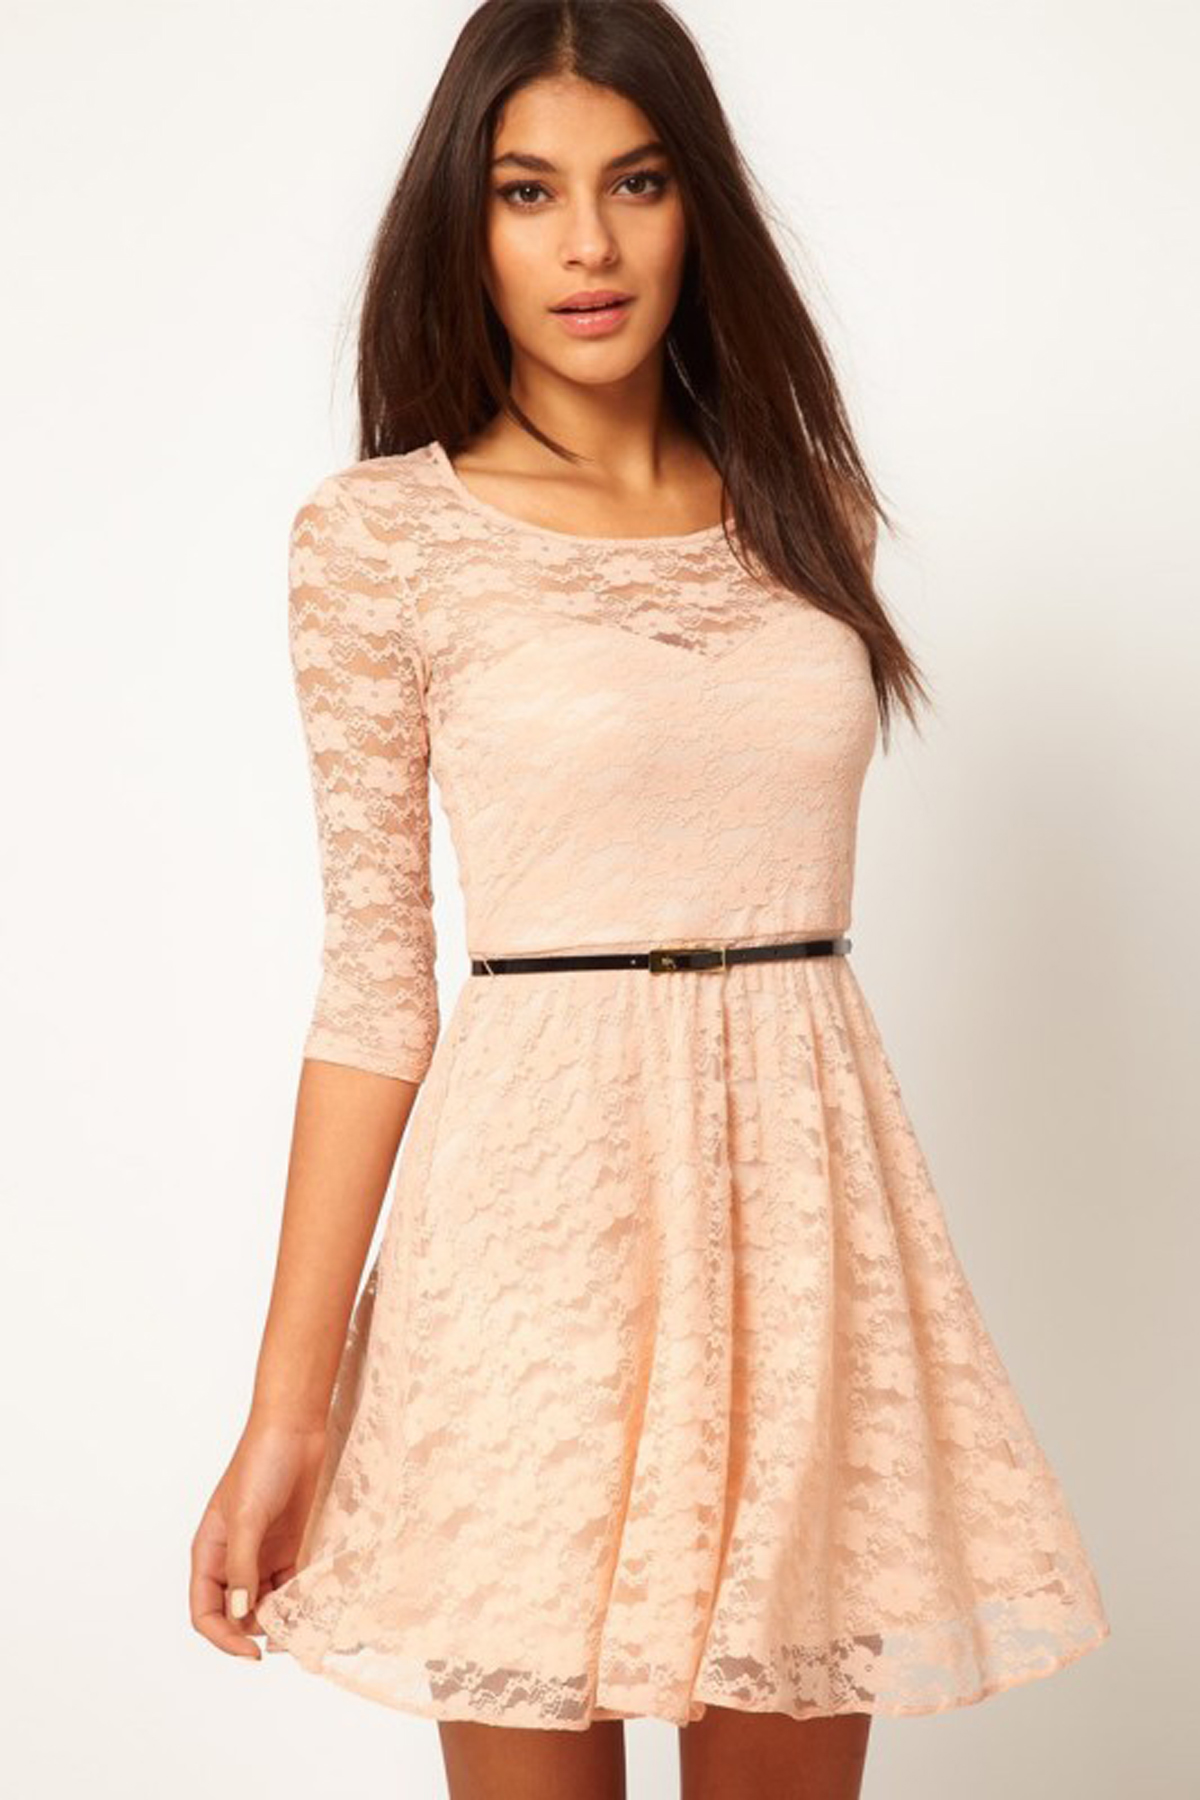 Sexy Peach Colored Mini Dress With 3 4 Sleeves And Lace Overlay